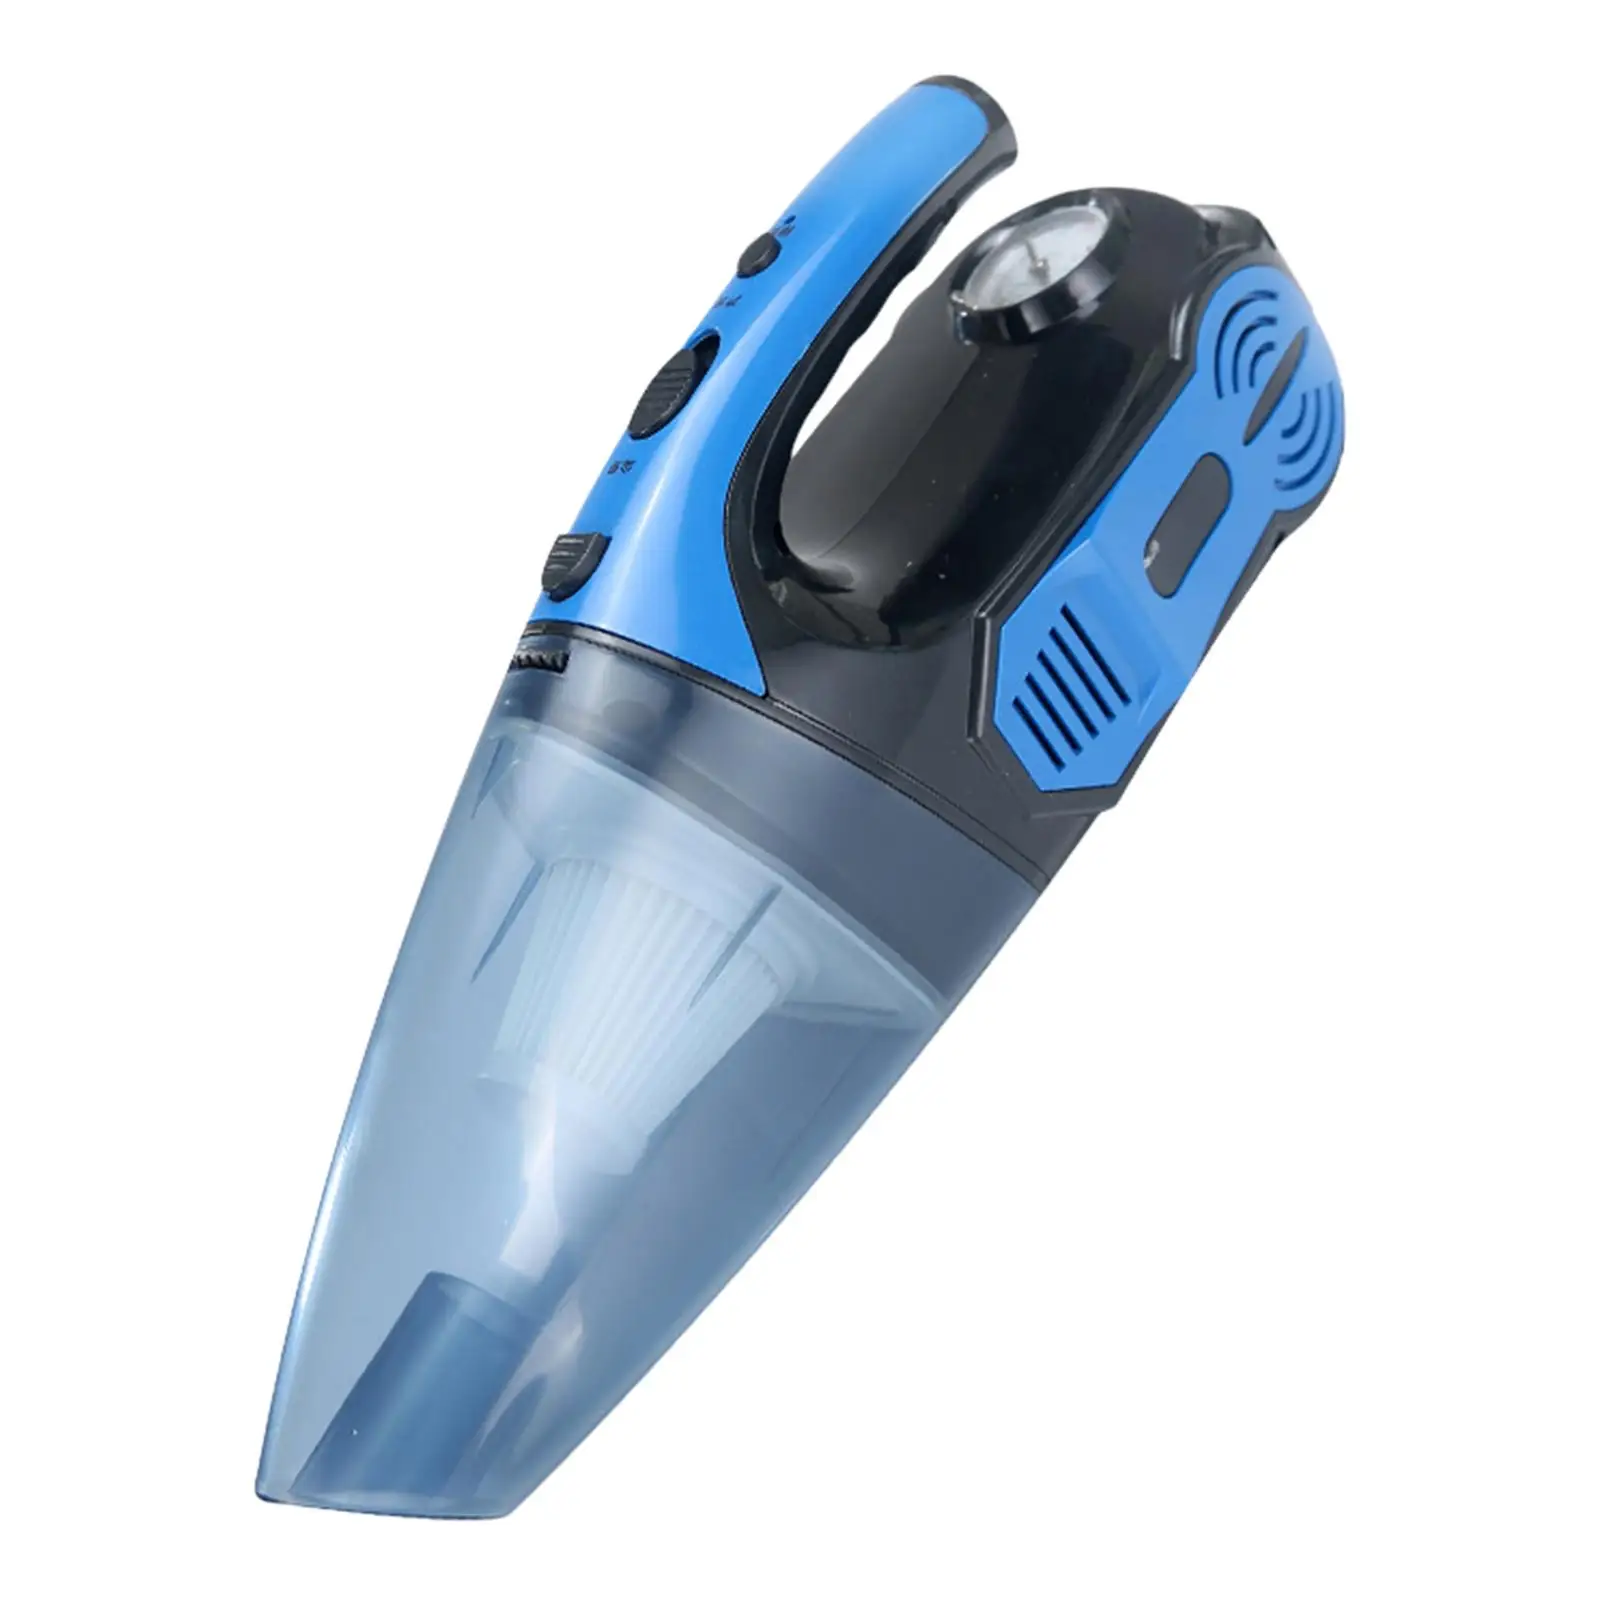 4-In-1 Car Vacuum Cleaner Tire Inflator High Power High-Power Handheld Mini Vacuum Fit for Vehicle Home Office Sofa Pet Hair